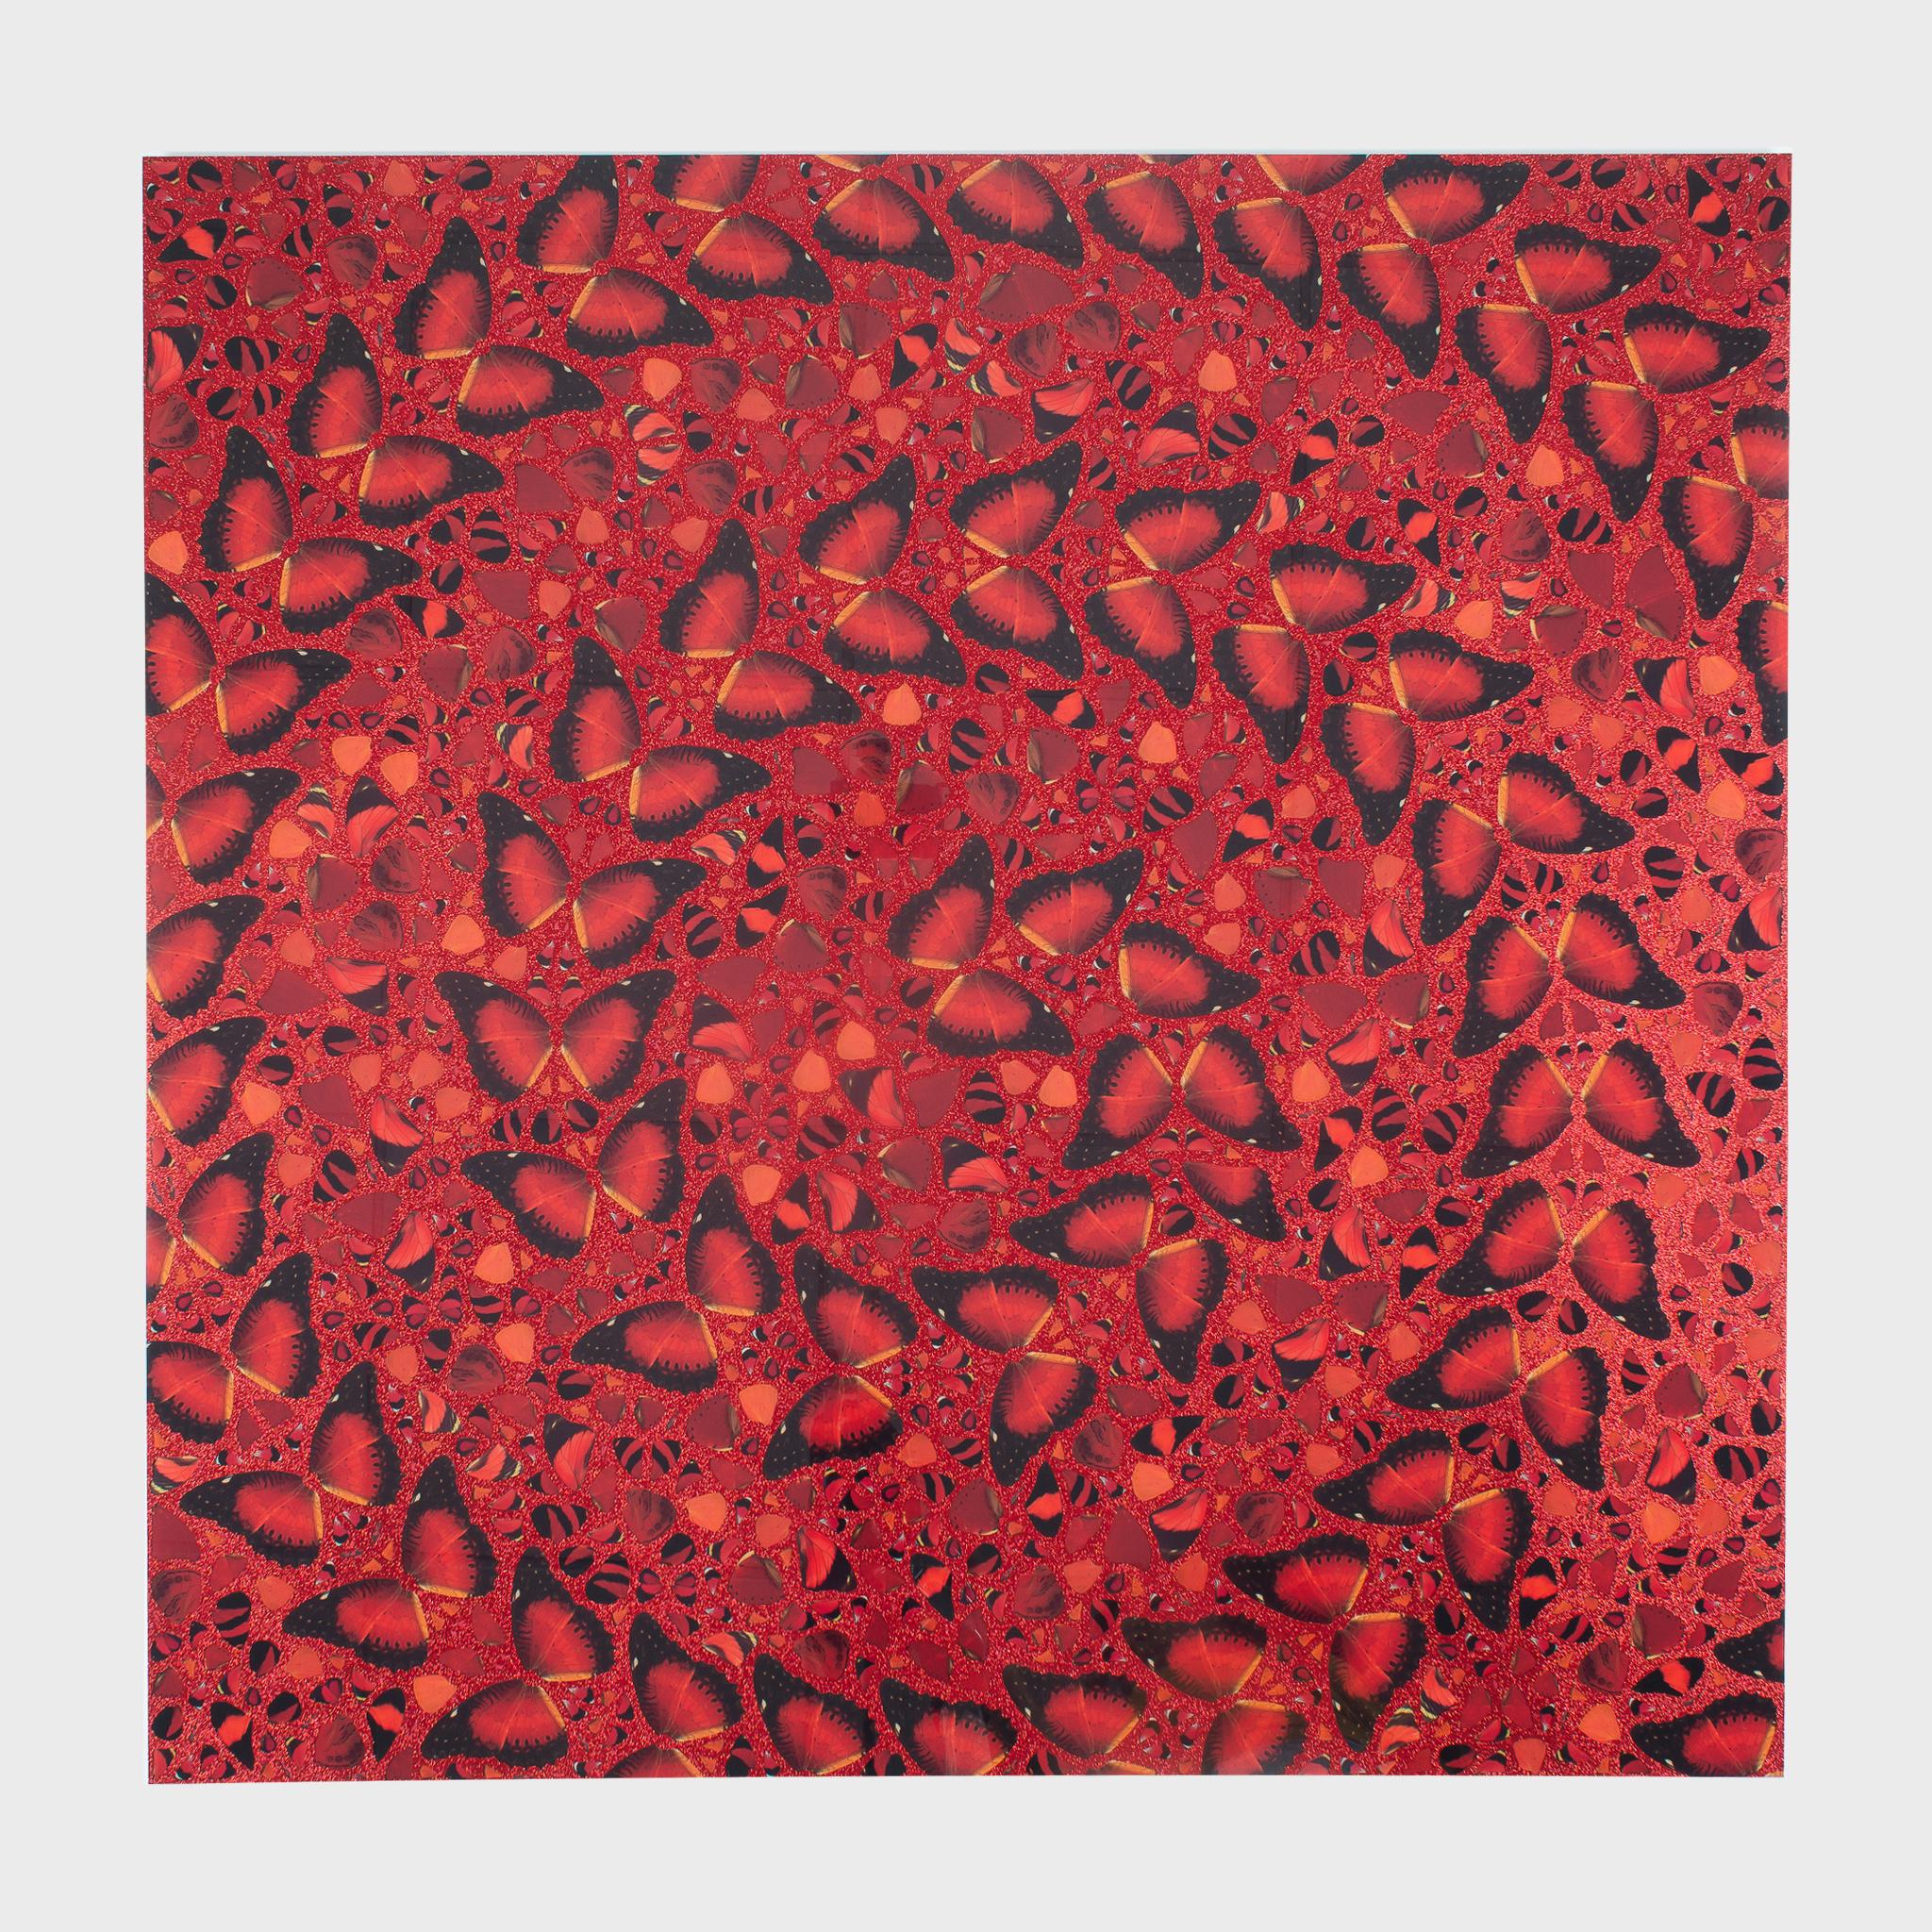 Damien Hirst Abstract Print - H10-5 Taytu Betul (from the Empresses)